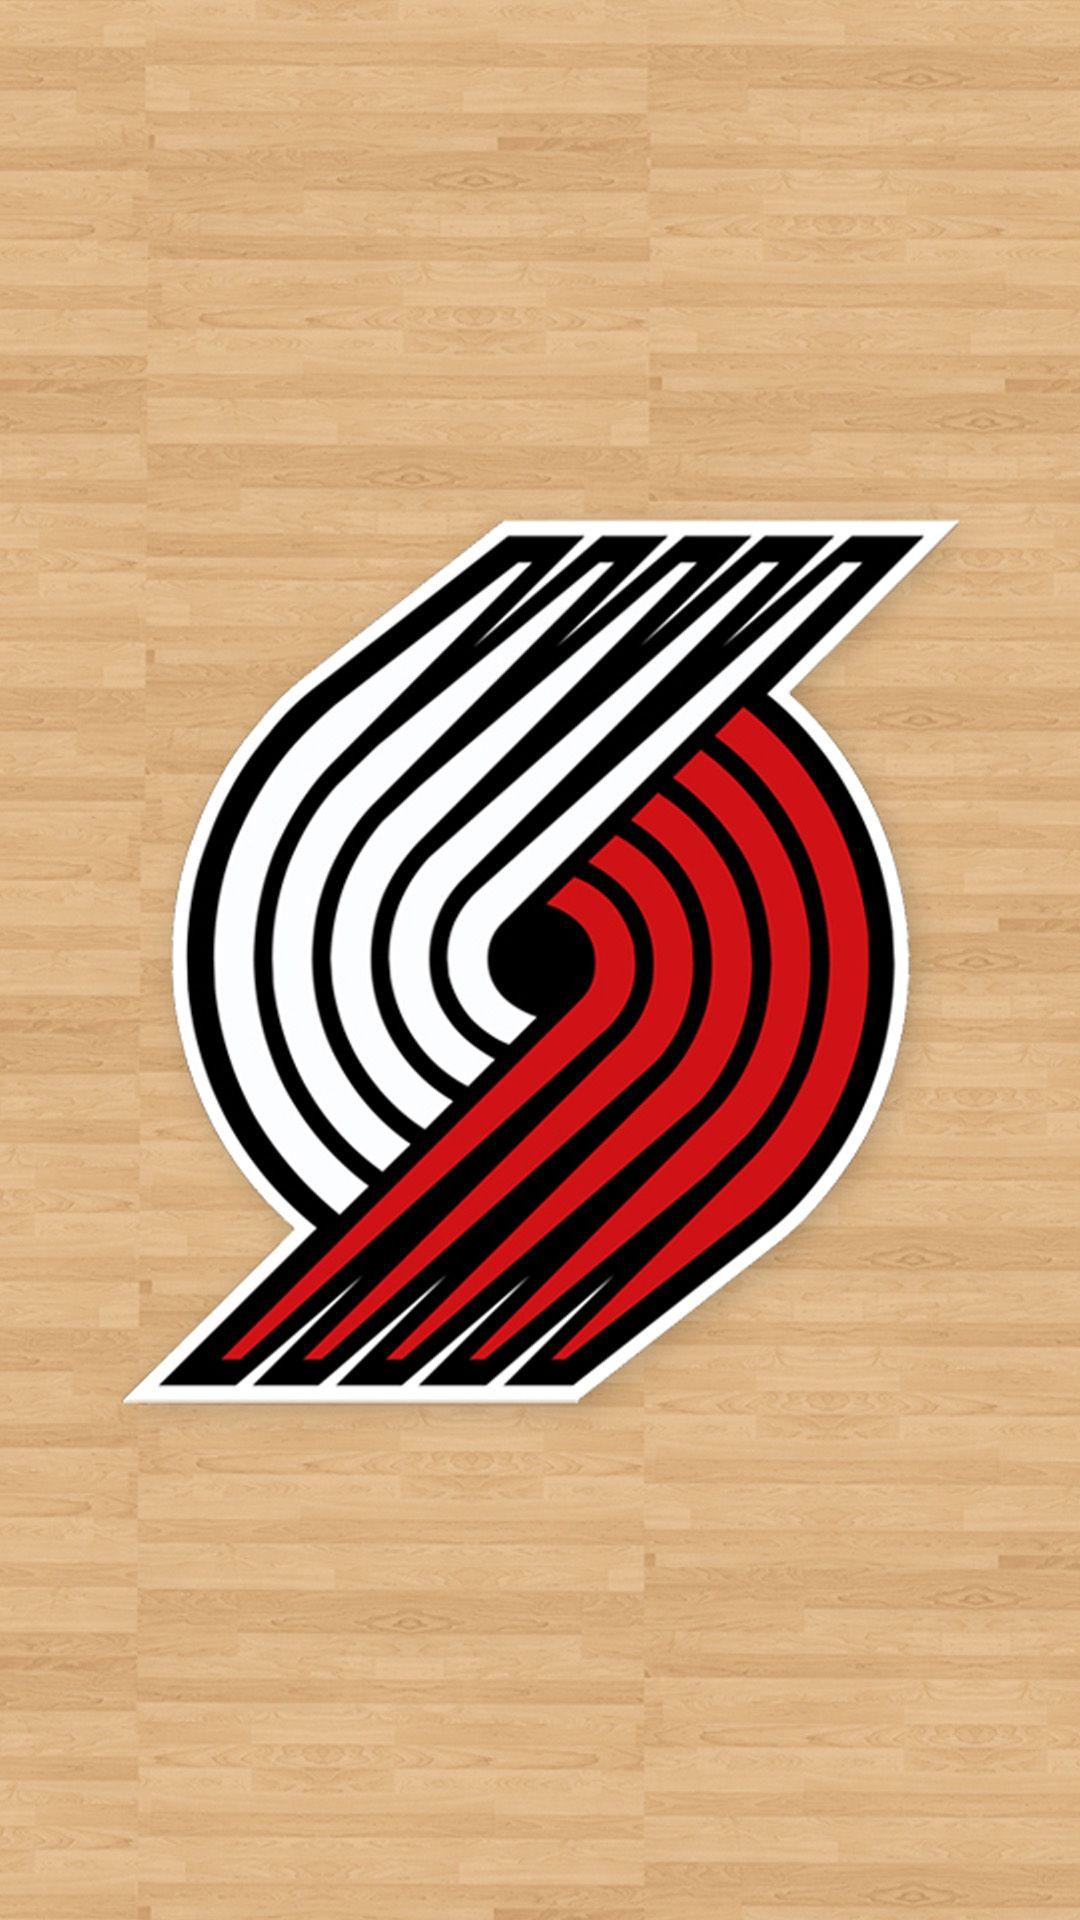 Portland Trail Blazers Wallpaper for iPhone iPhone 7 plus